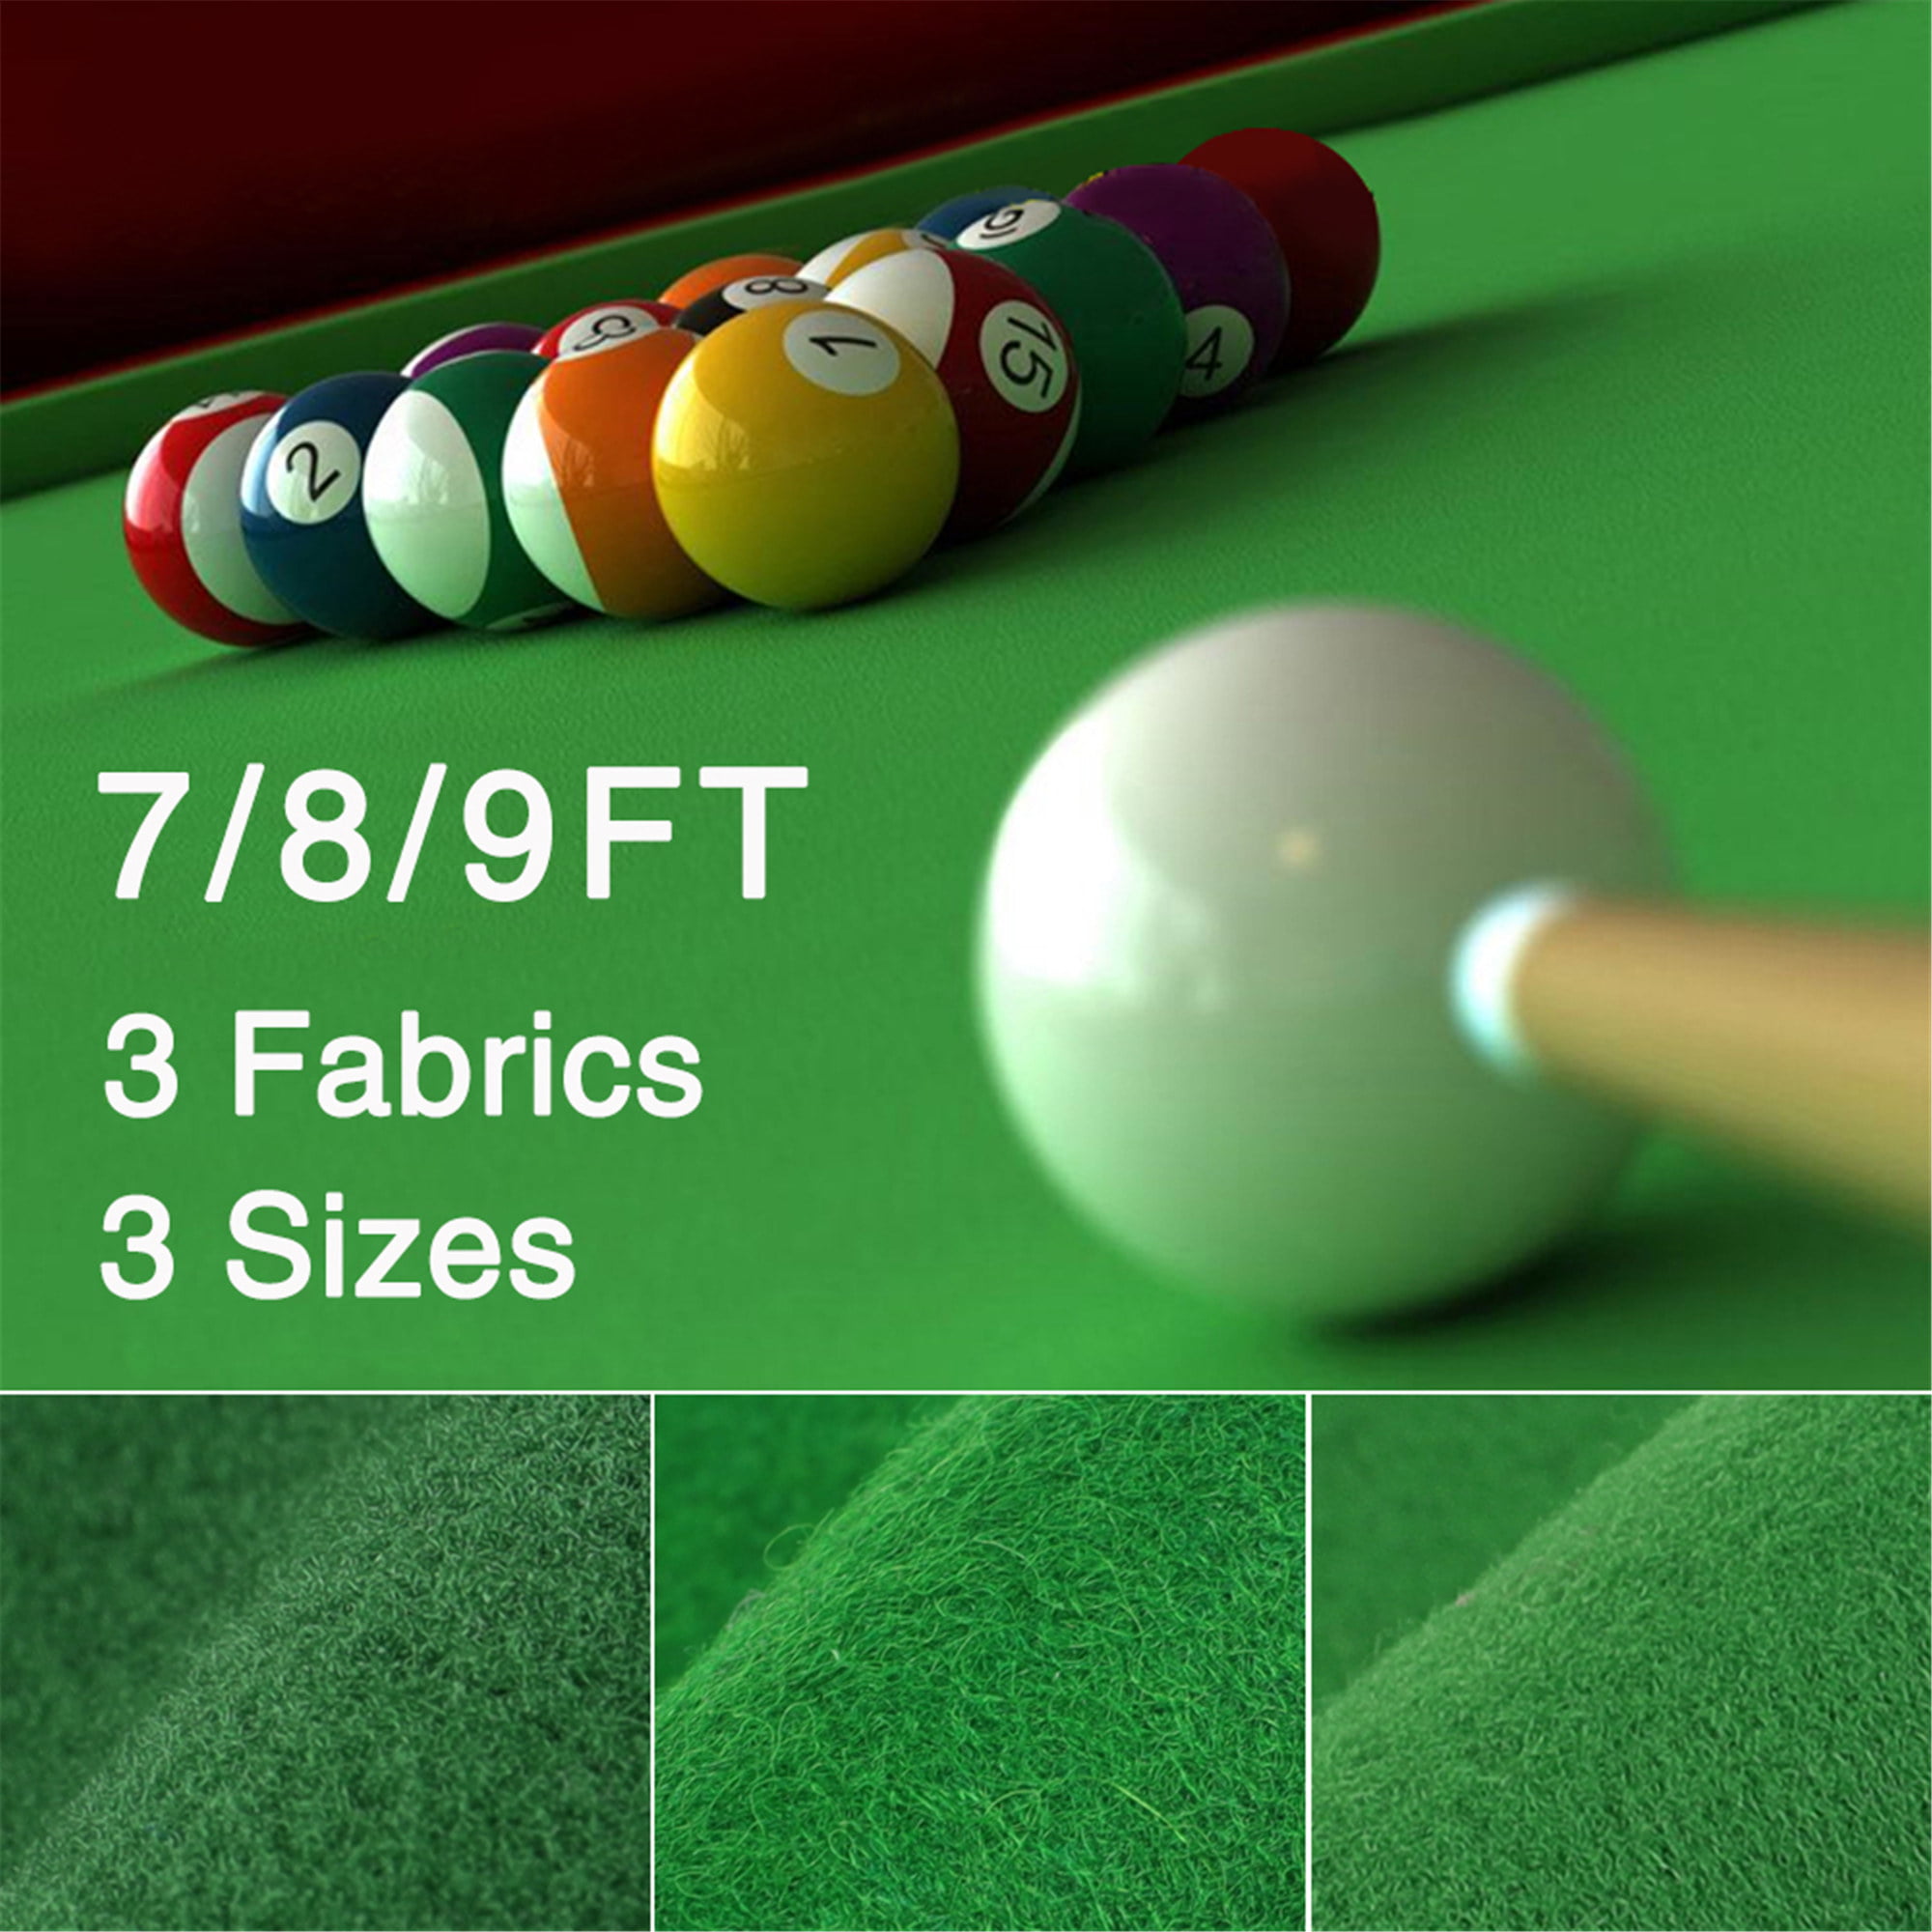 Worsted Wool+Nylon Billiard Pool Table Cloth Cover Felt For 7//8//9FT Table 3  UK